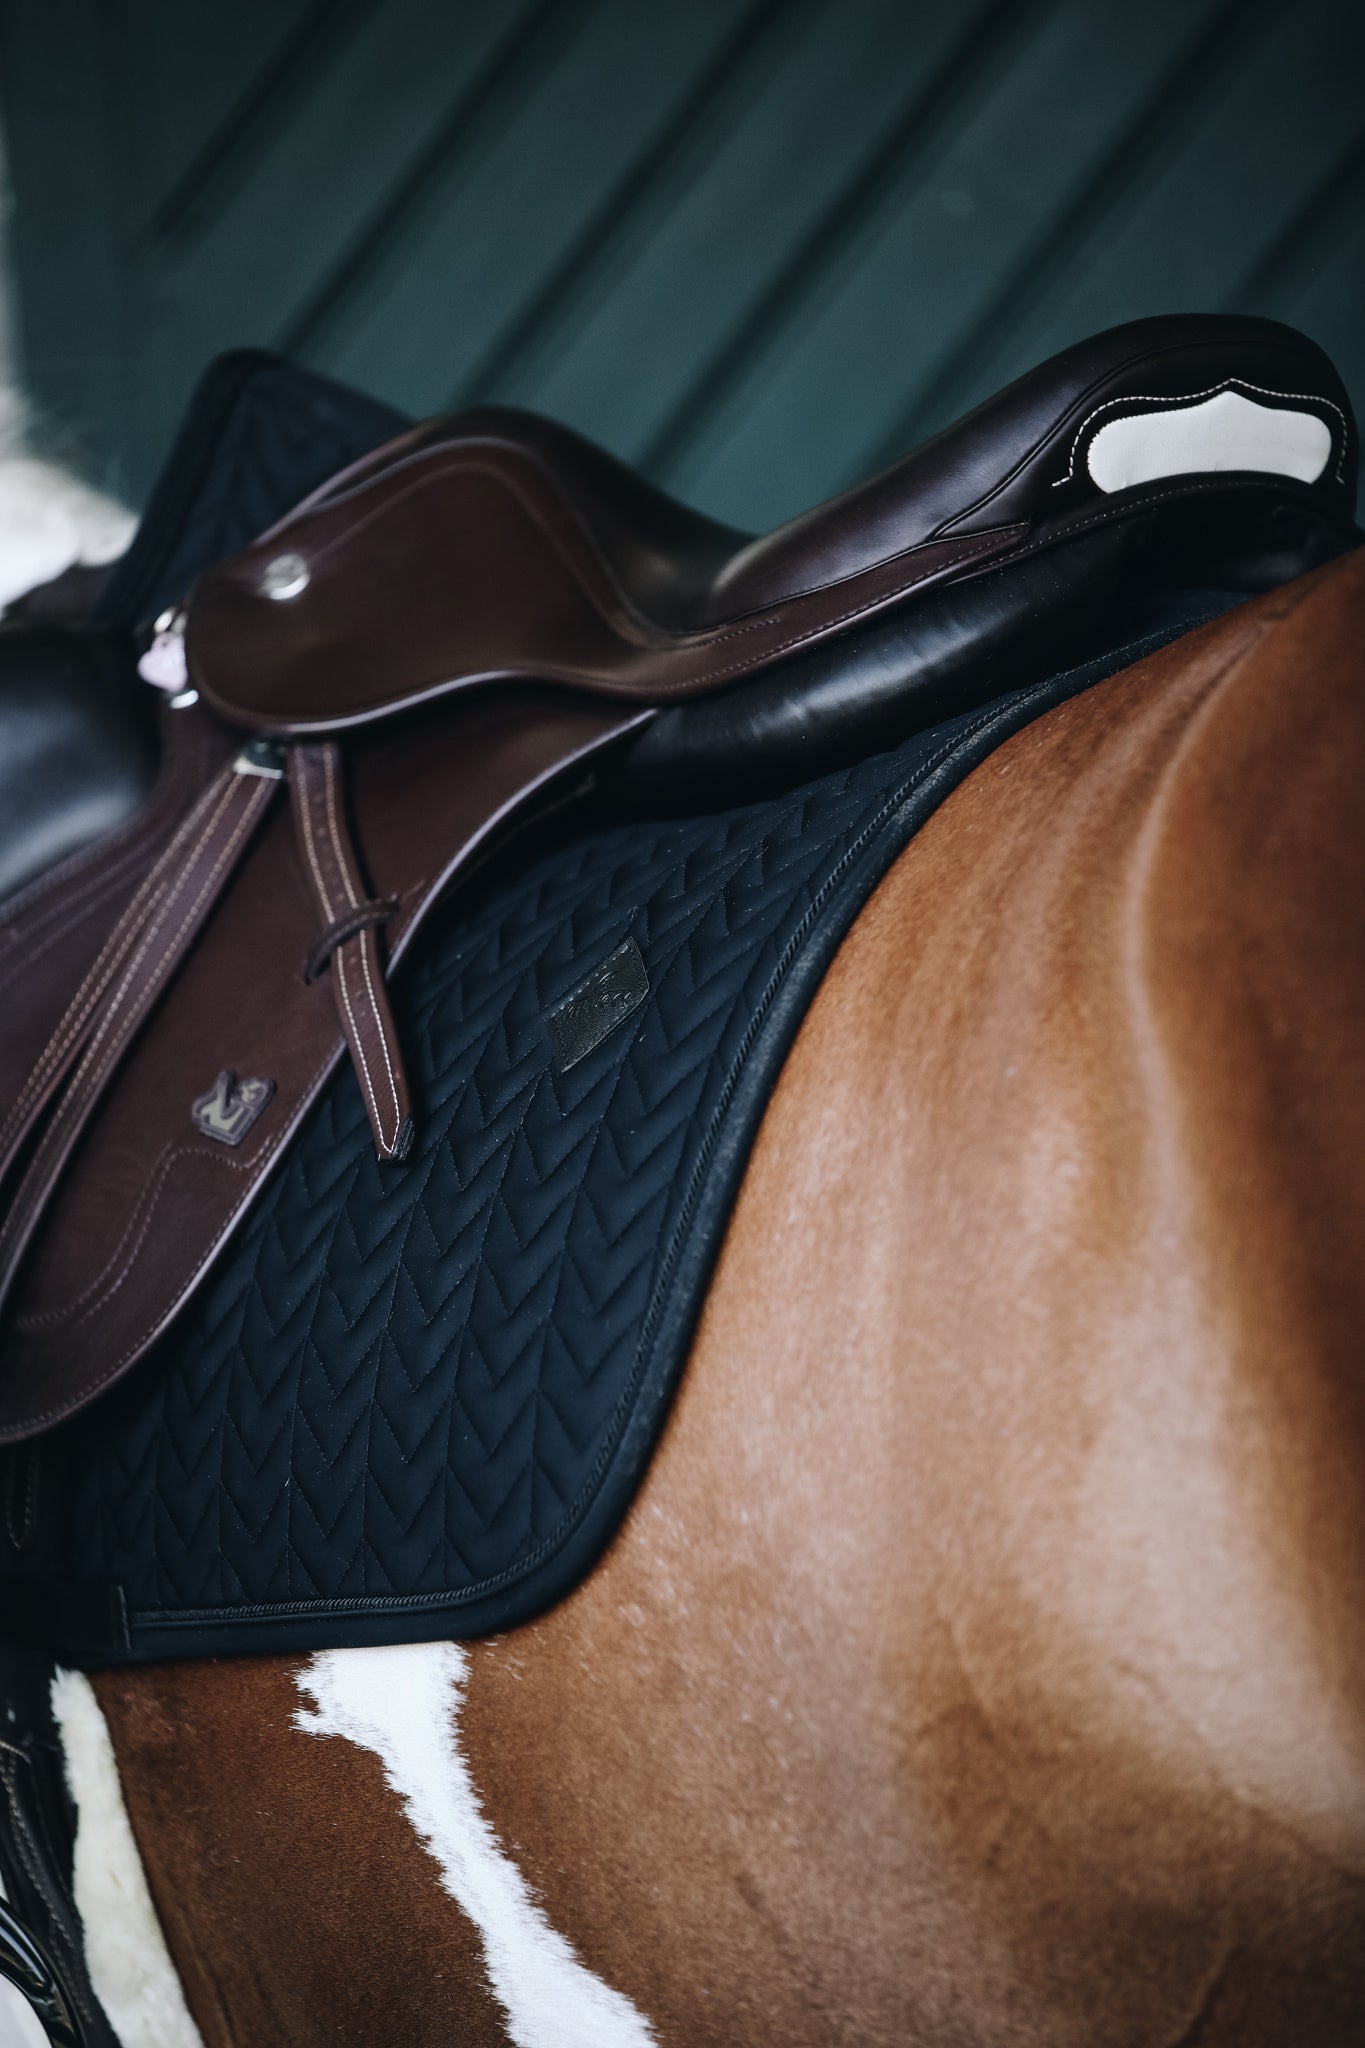 The Kentucky Saddle Pad Fishbone Jumping pad is shaped for jumping and provides excellent cushioning between the horse’s back and the saddle while protecting against friction. 